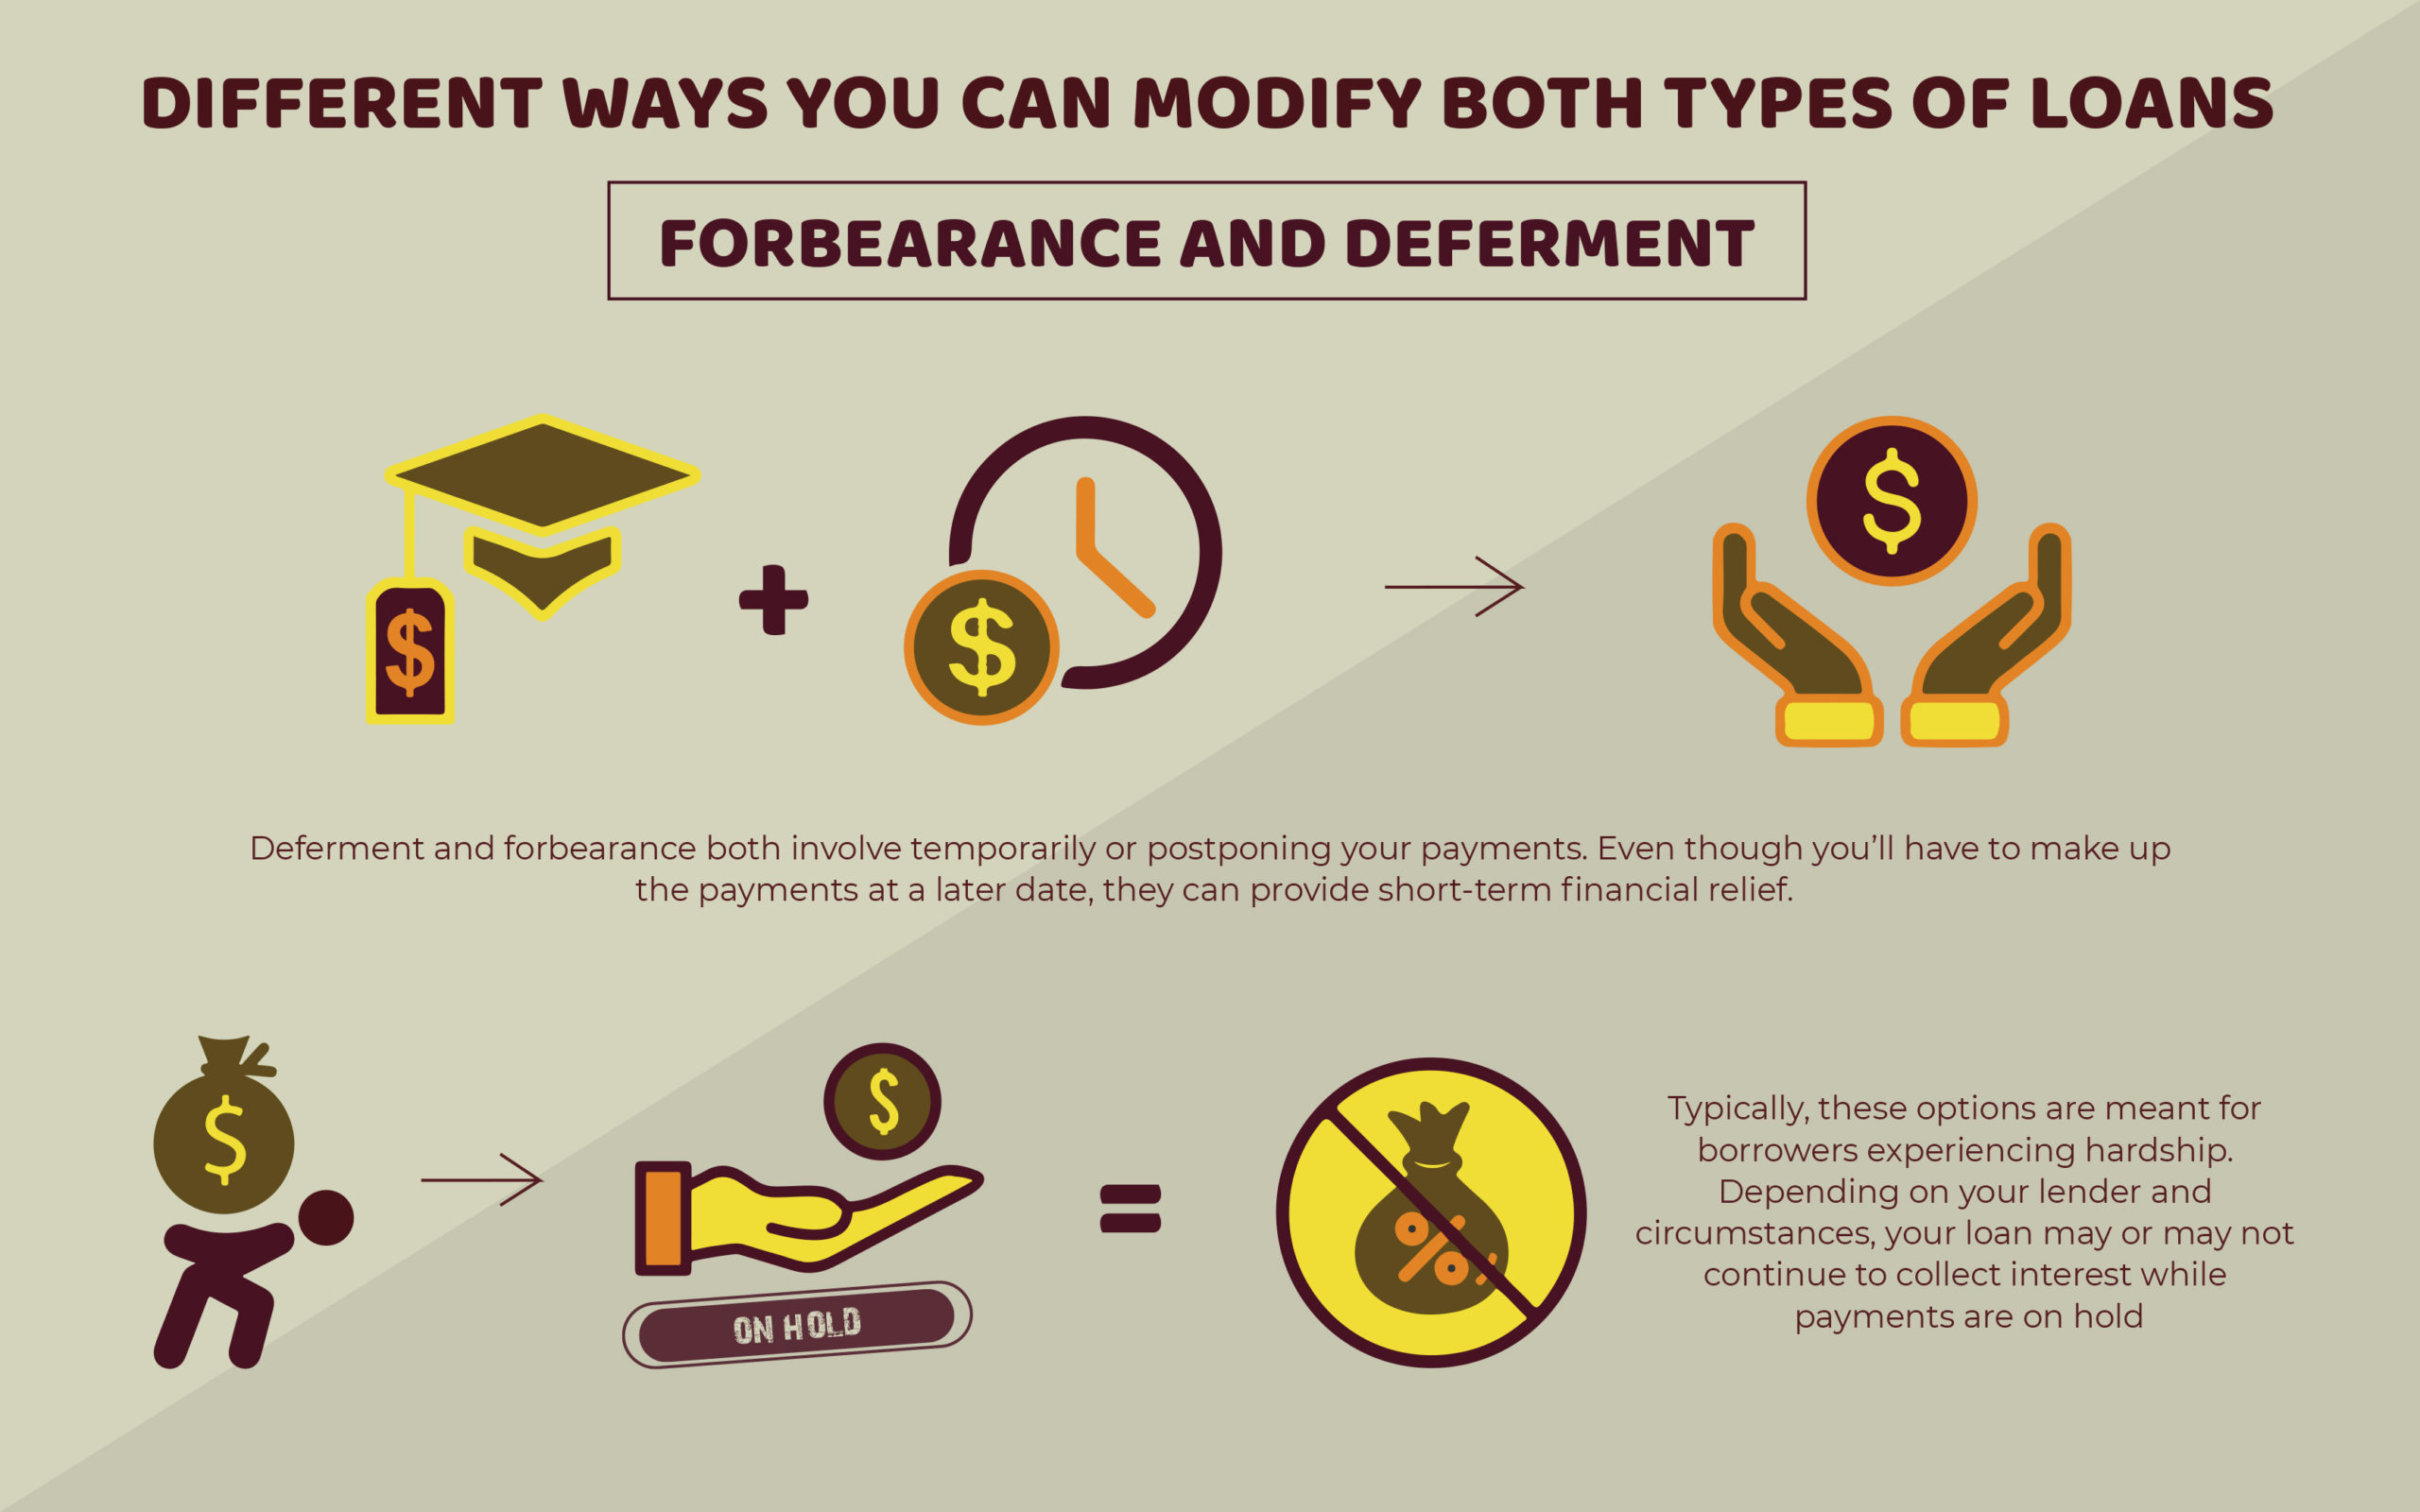 Forbearance and Deferment